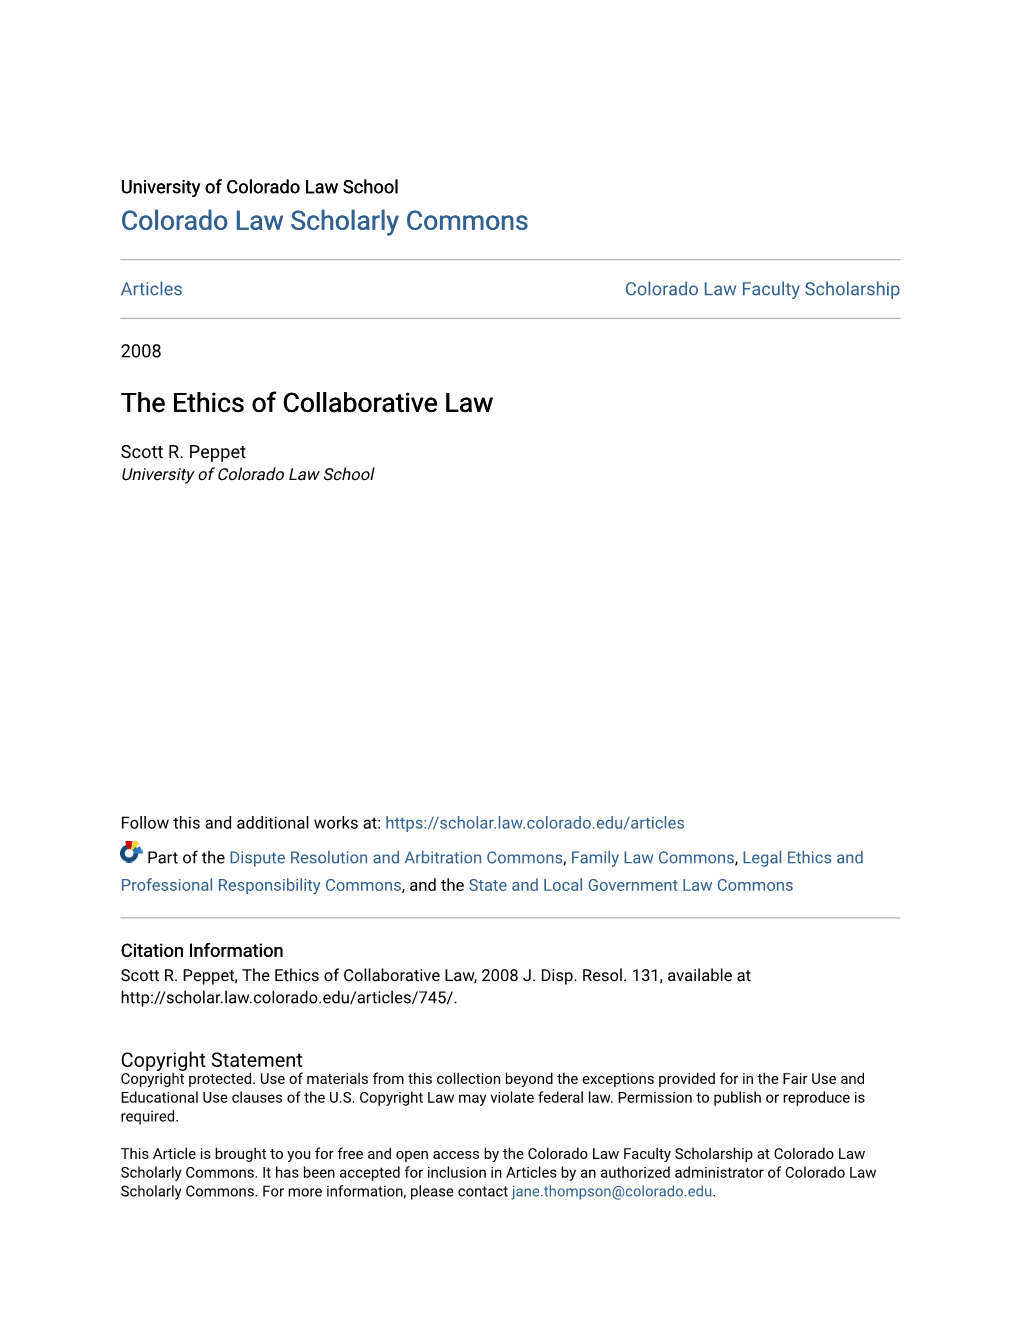 The Ethics of Collaborative Law